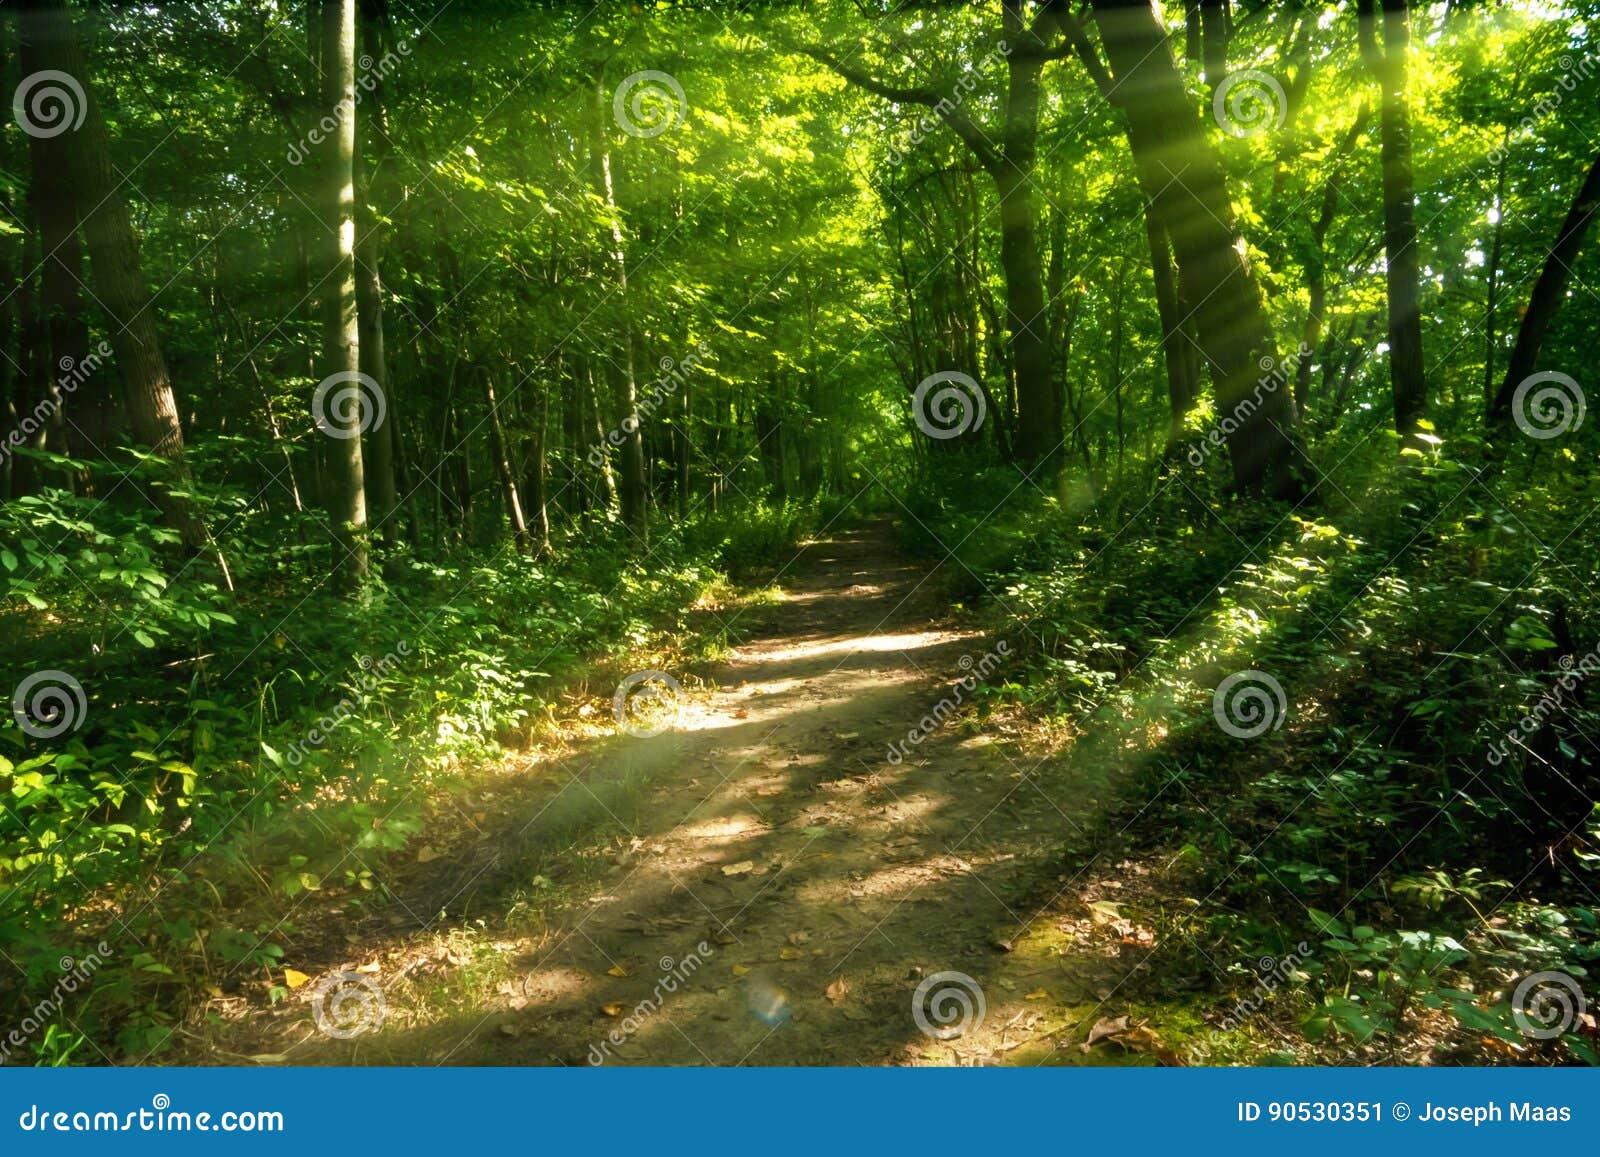 mysterious wooded path